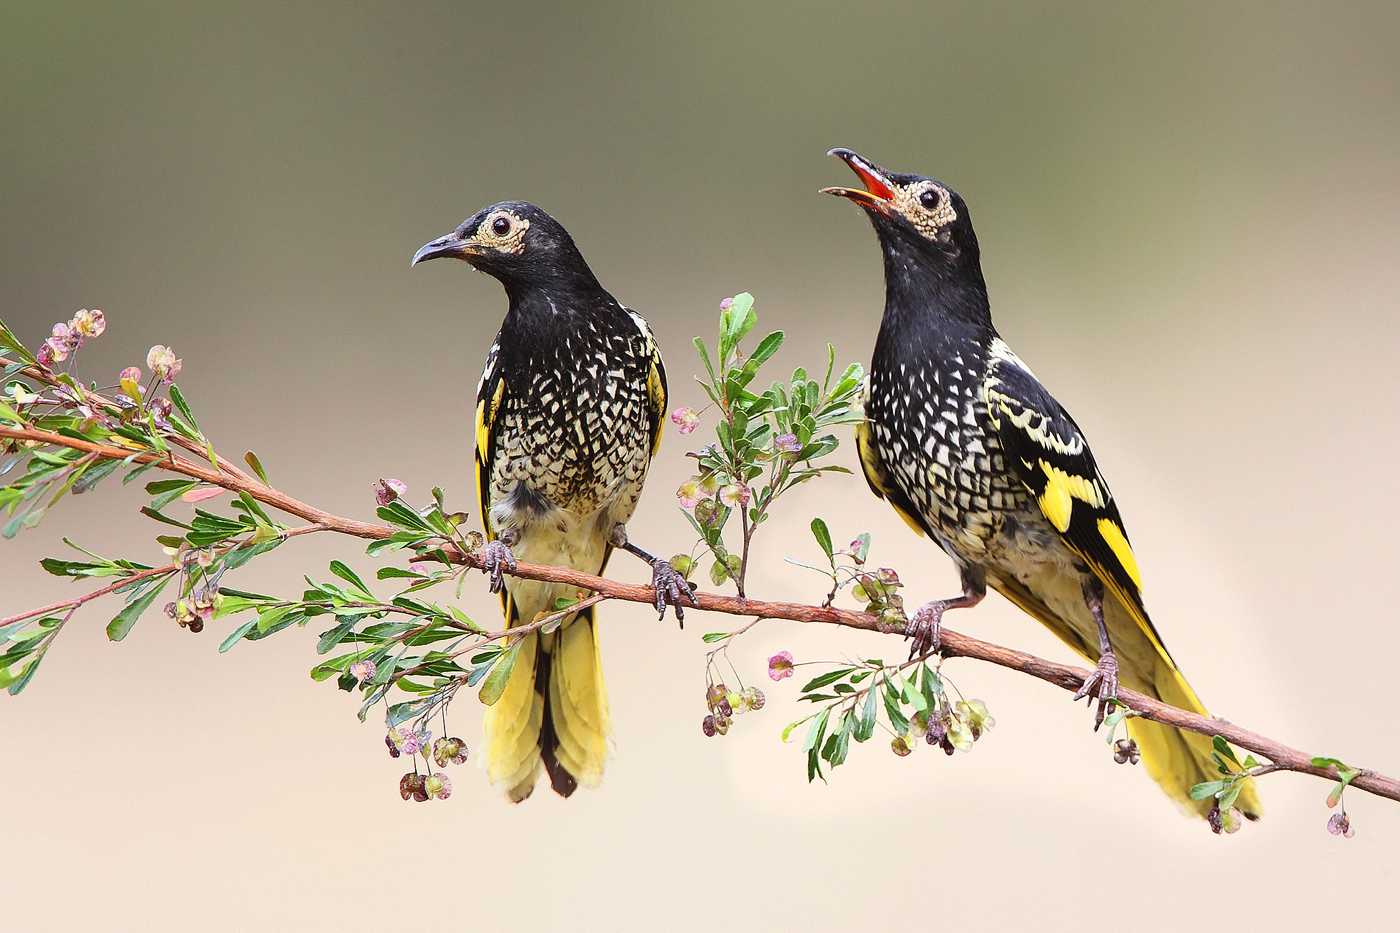 A Regent without an empire: habitat loss and the decline of the Regent Honeyeater